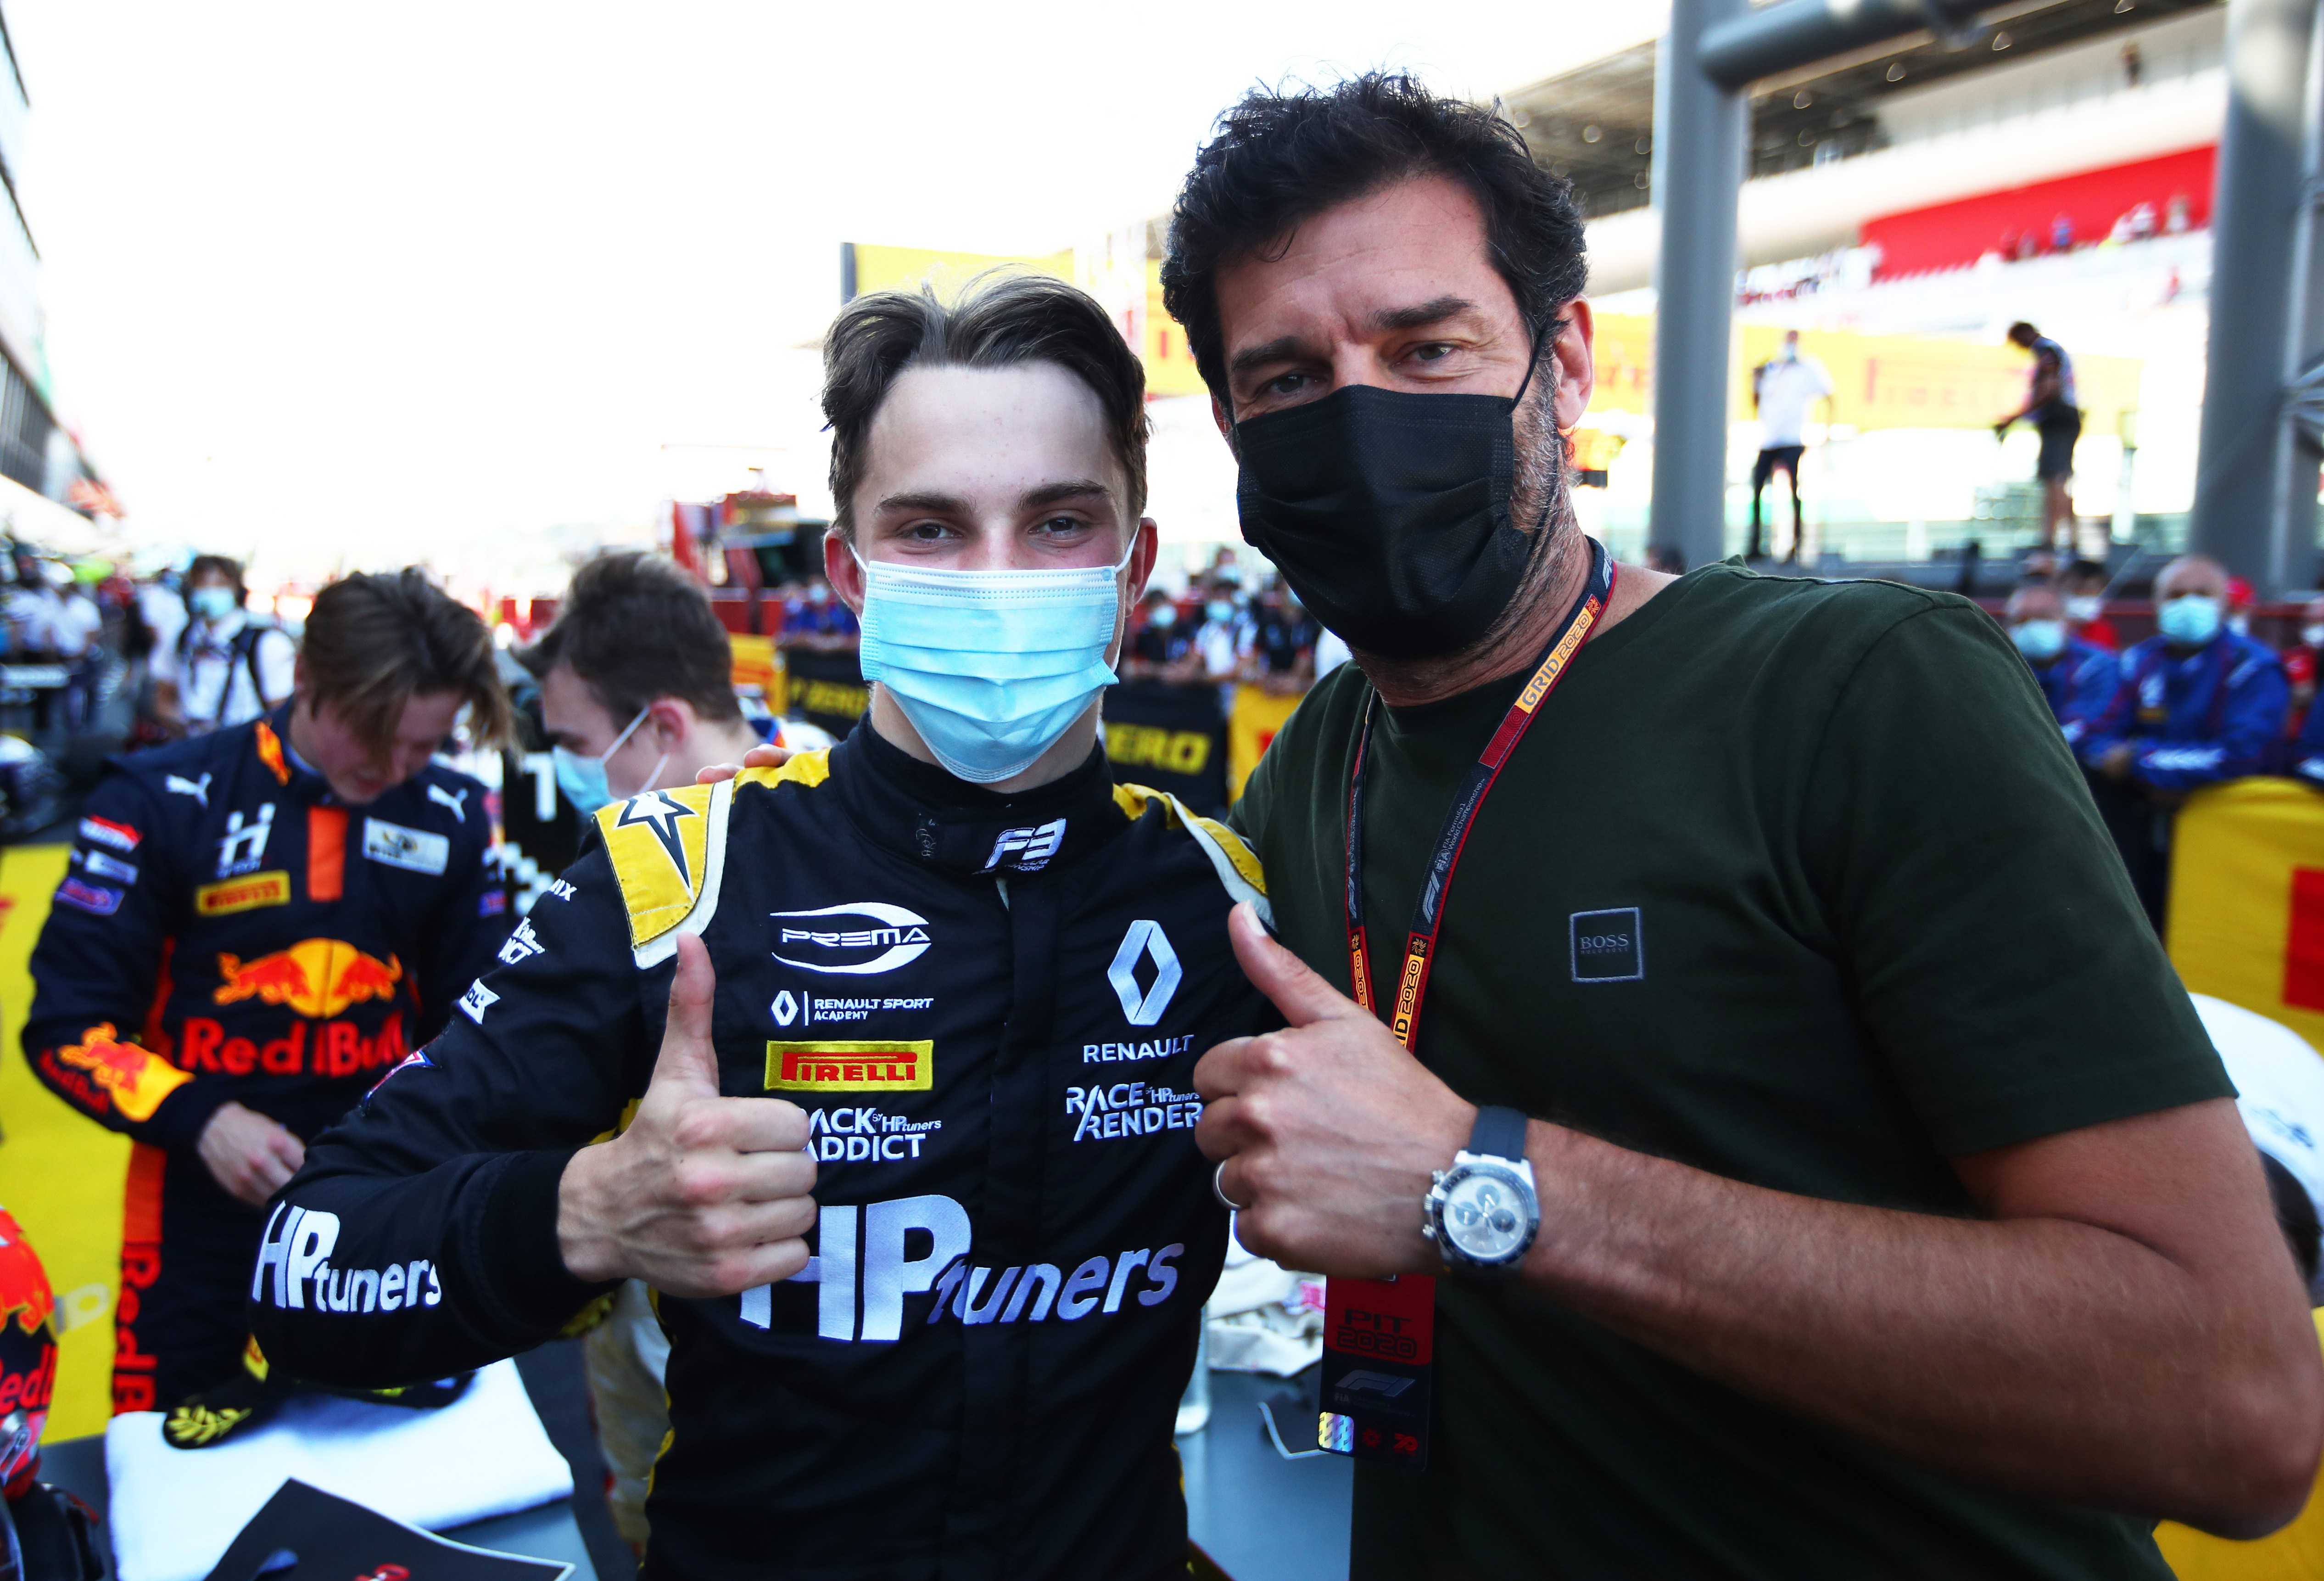 Championship winner Oscar Piastri of Australia and Prema Racing poses for a photo with former F1 driver Mark Webber in parc ferme during the Formula 3 Championship Second Race at Mugello Circuit on September 13, 2020 in Scarperia, Italy. (Photo by Joe Portlock - Formula 1/Formula 1 via Getty Images)